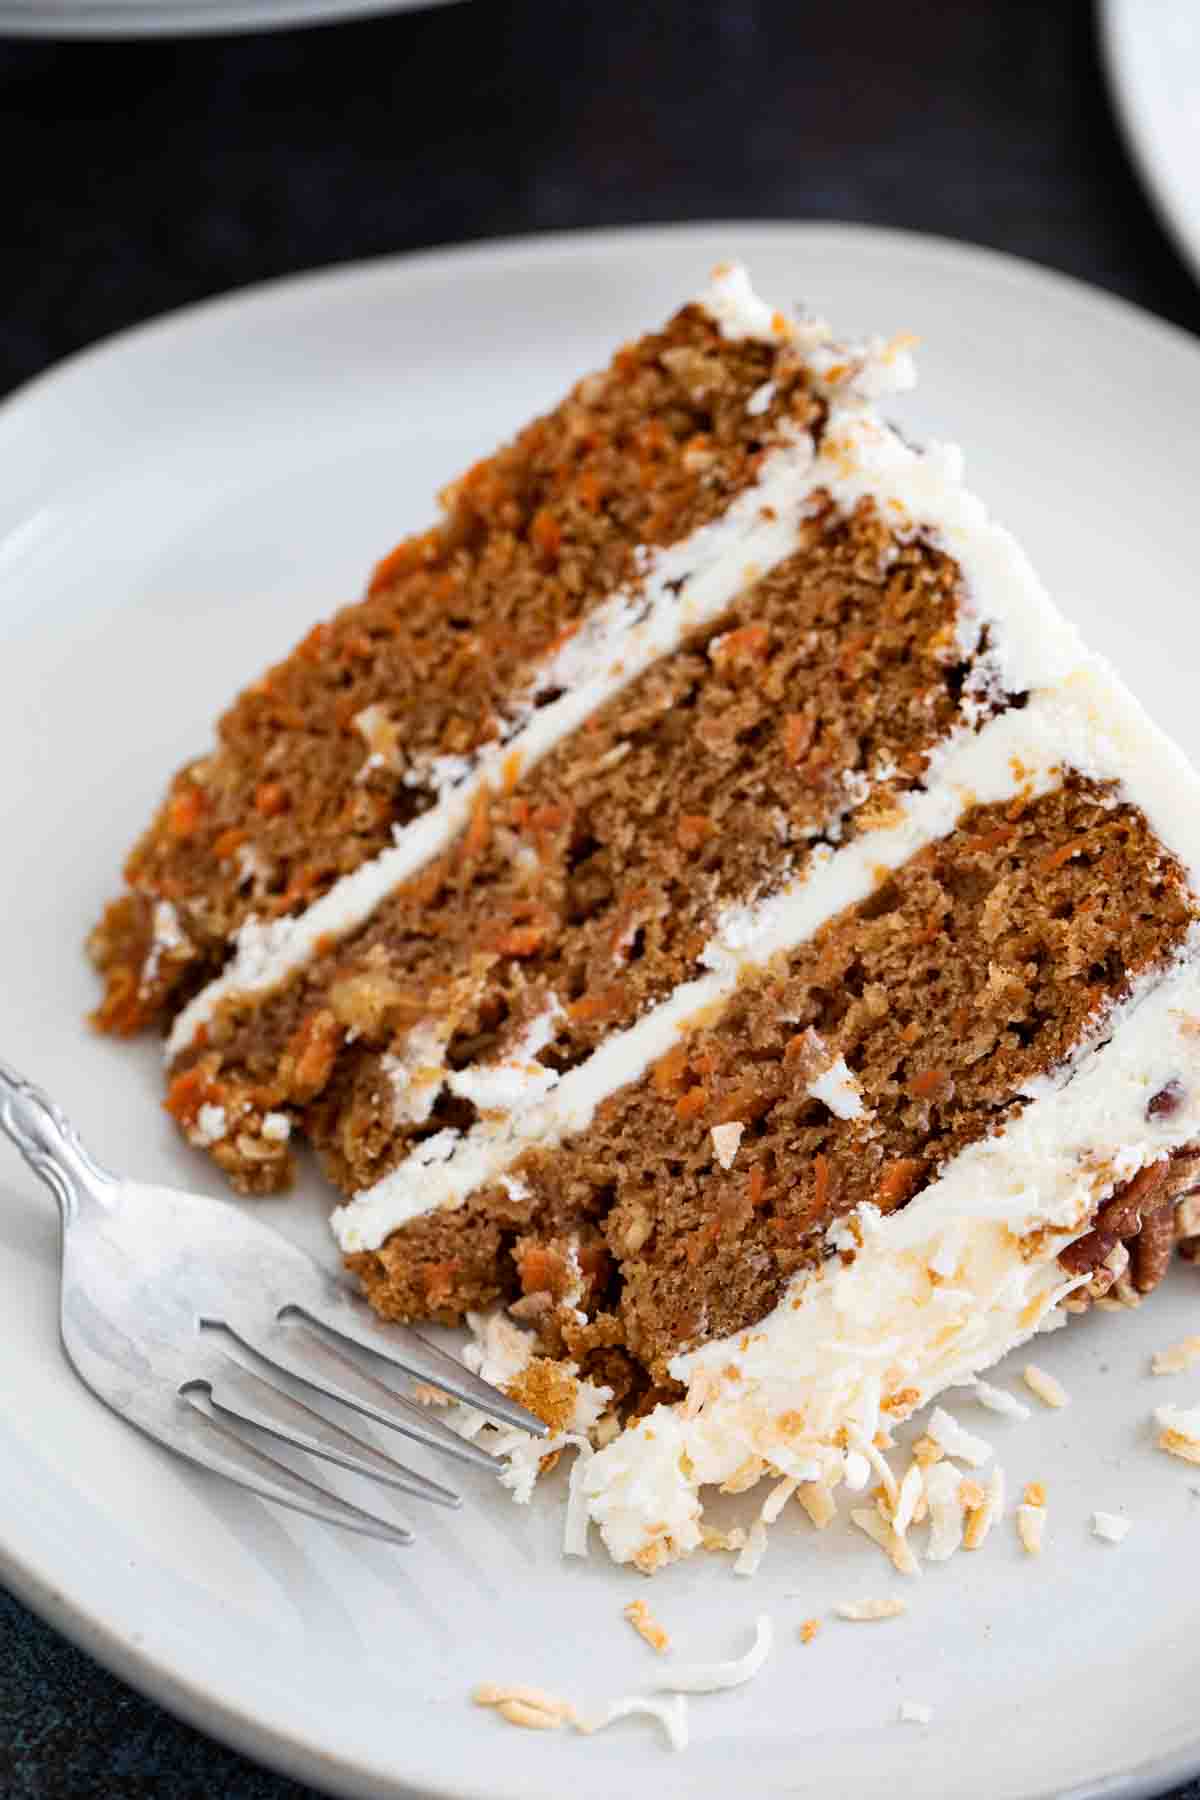 slice of layered carrot cake on a plate showing texture